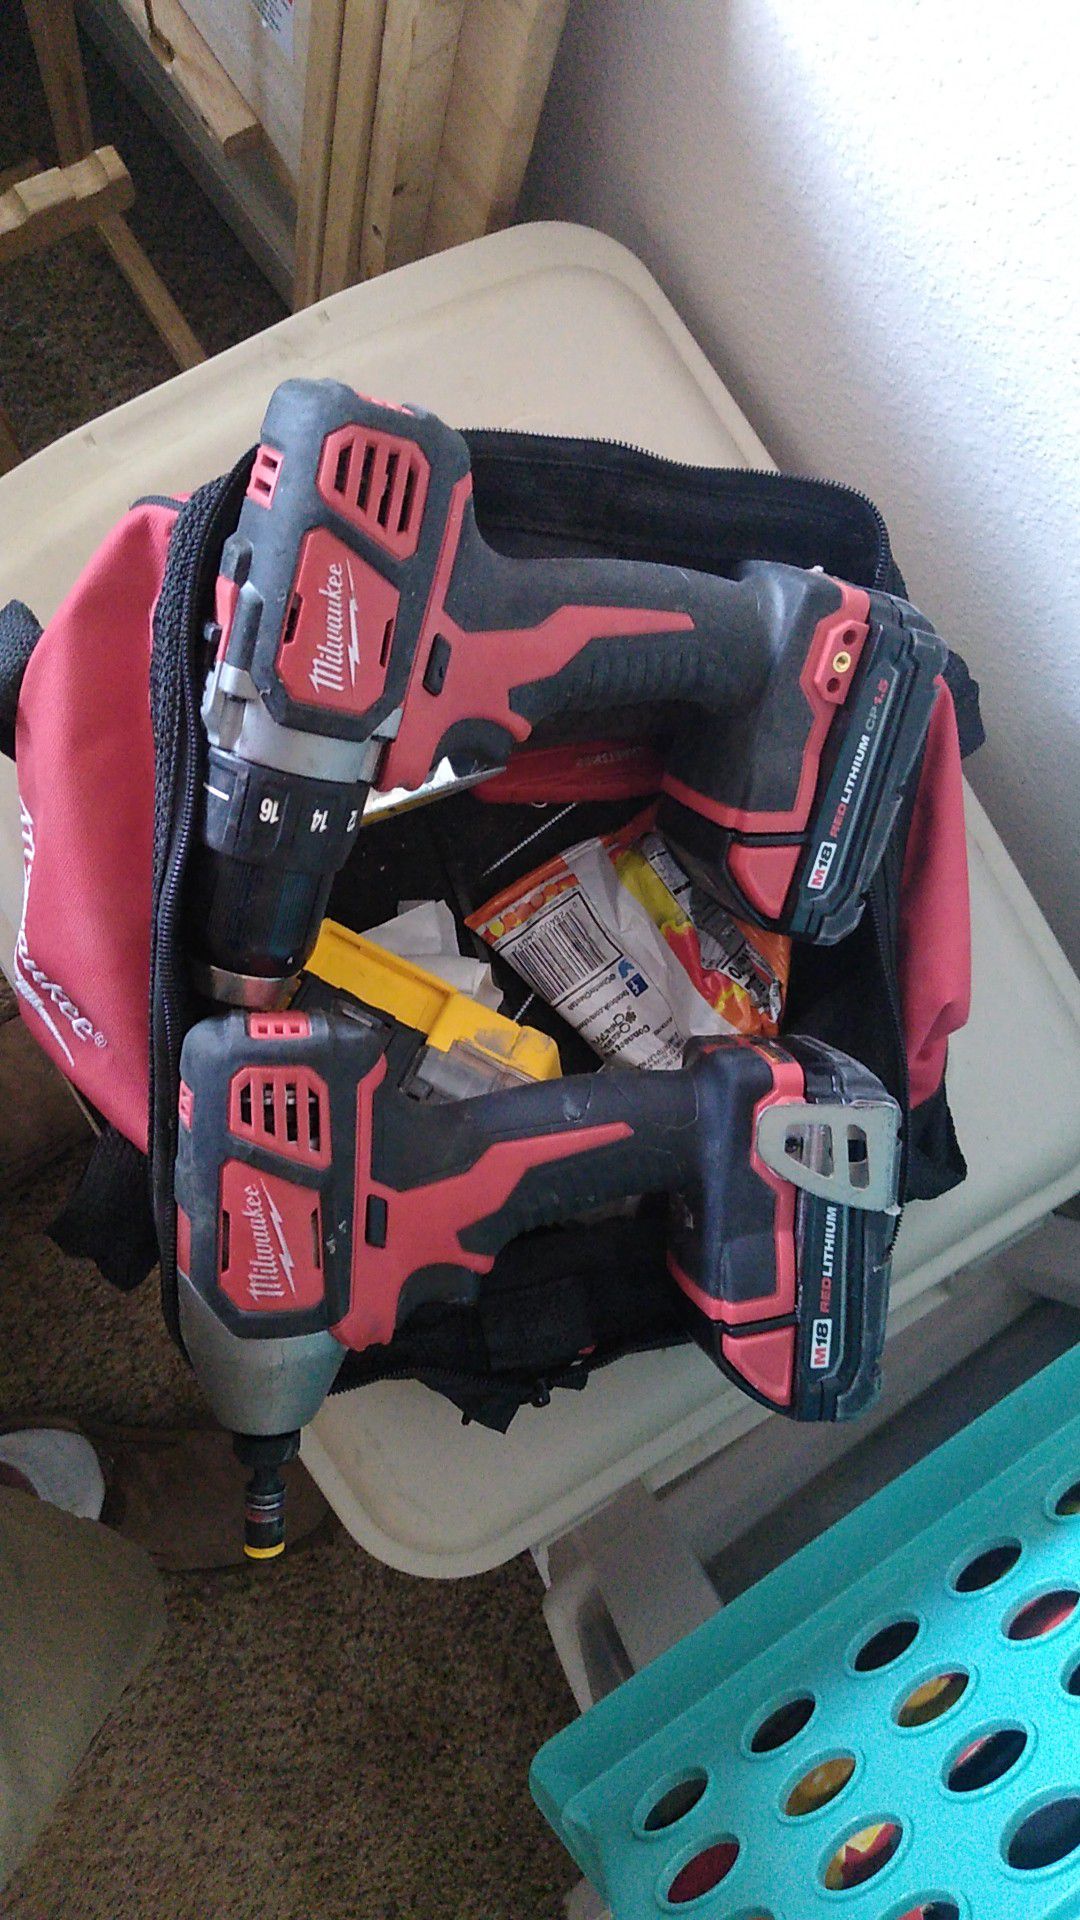 Milwaukee impact and drill. Also 2 batteries and charger.